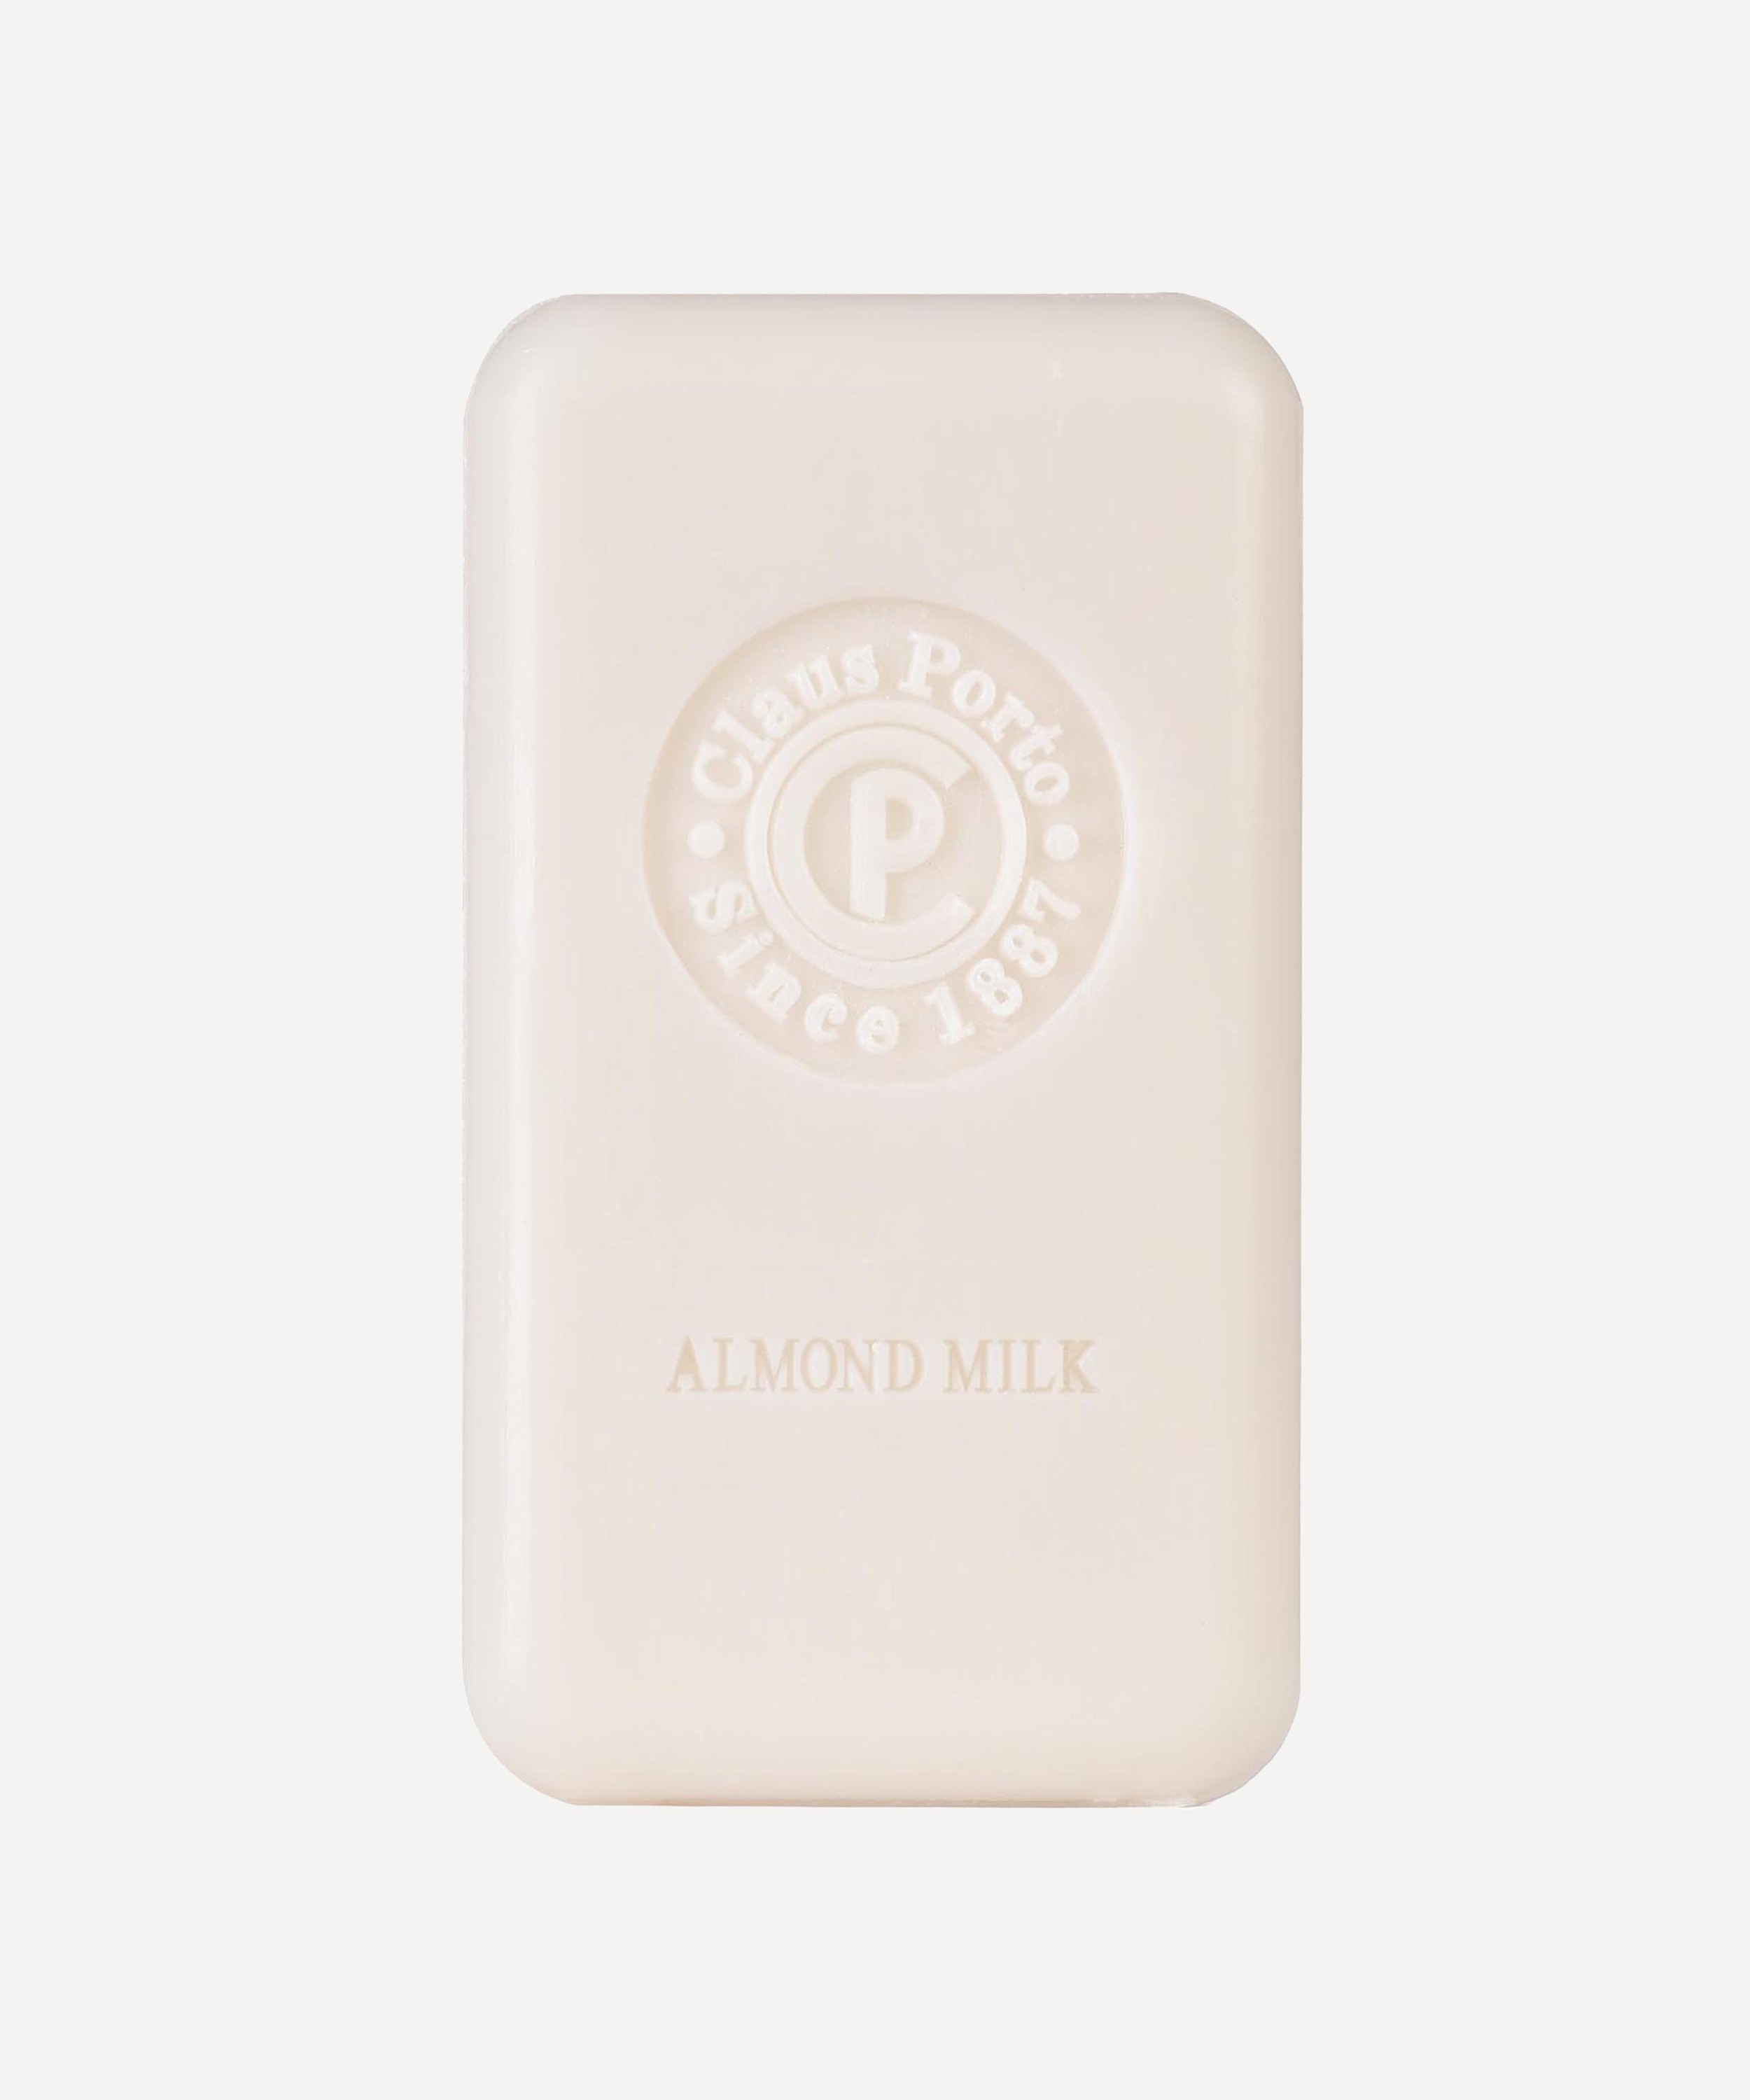 Claus Porto - Almond Milk Wax Sealed Soap 150g image number 2